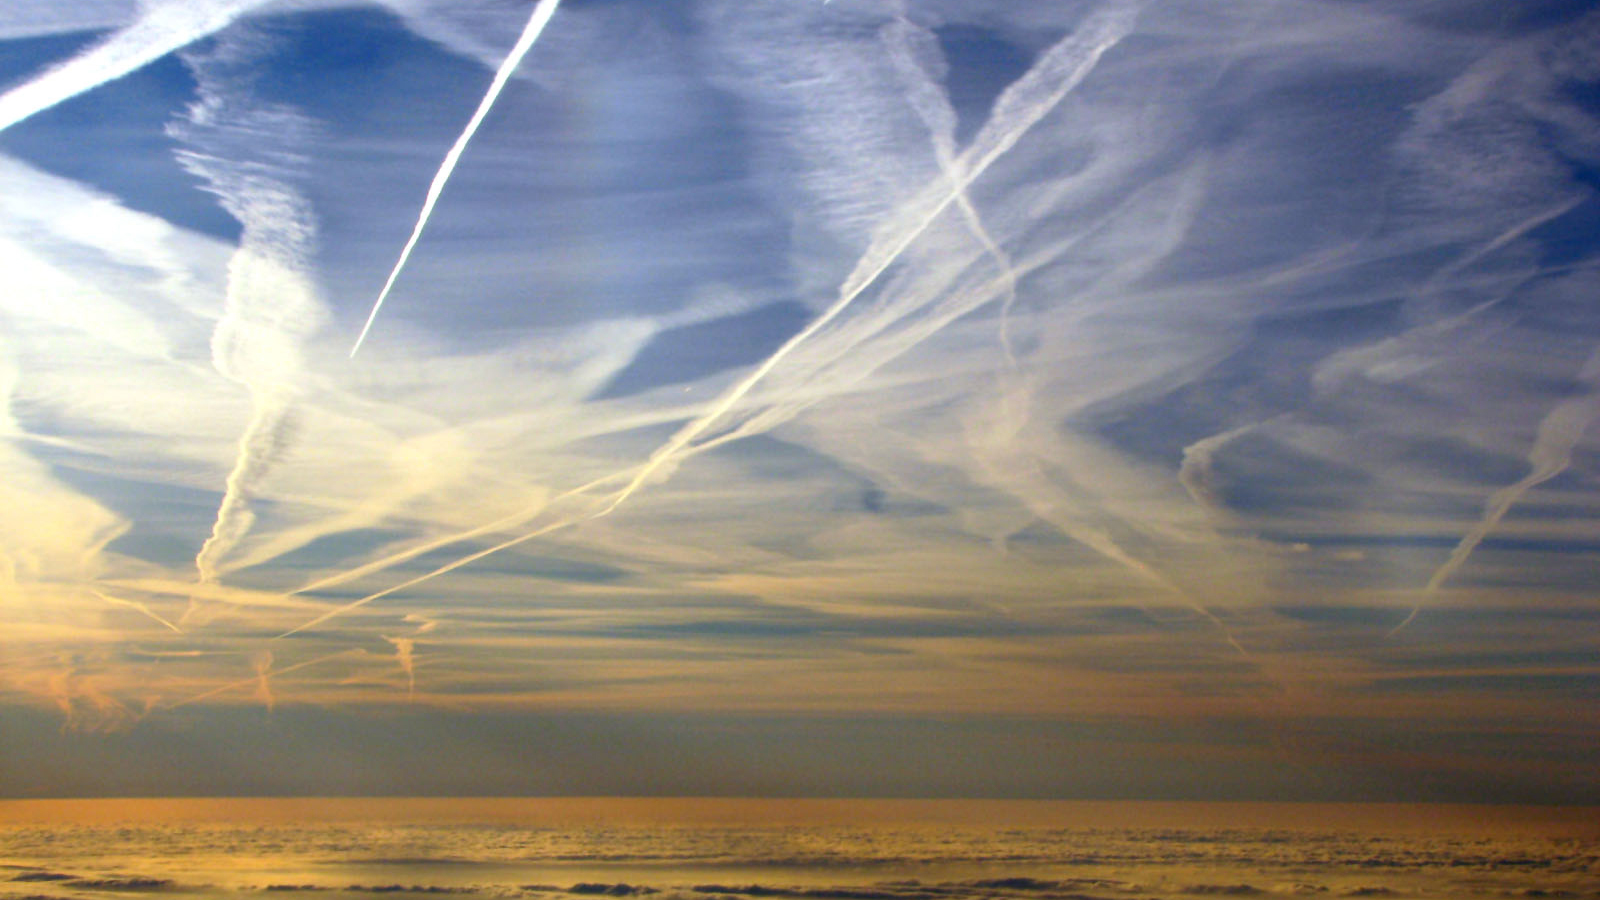 Contrails on the approach to London Heathrow. Photo © Roo Reynolds/Flickr through a Creative Commons license